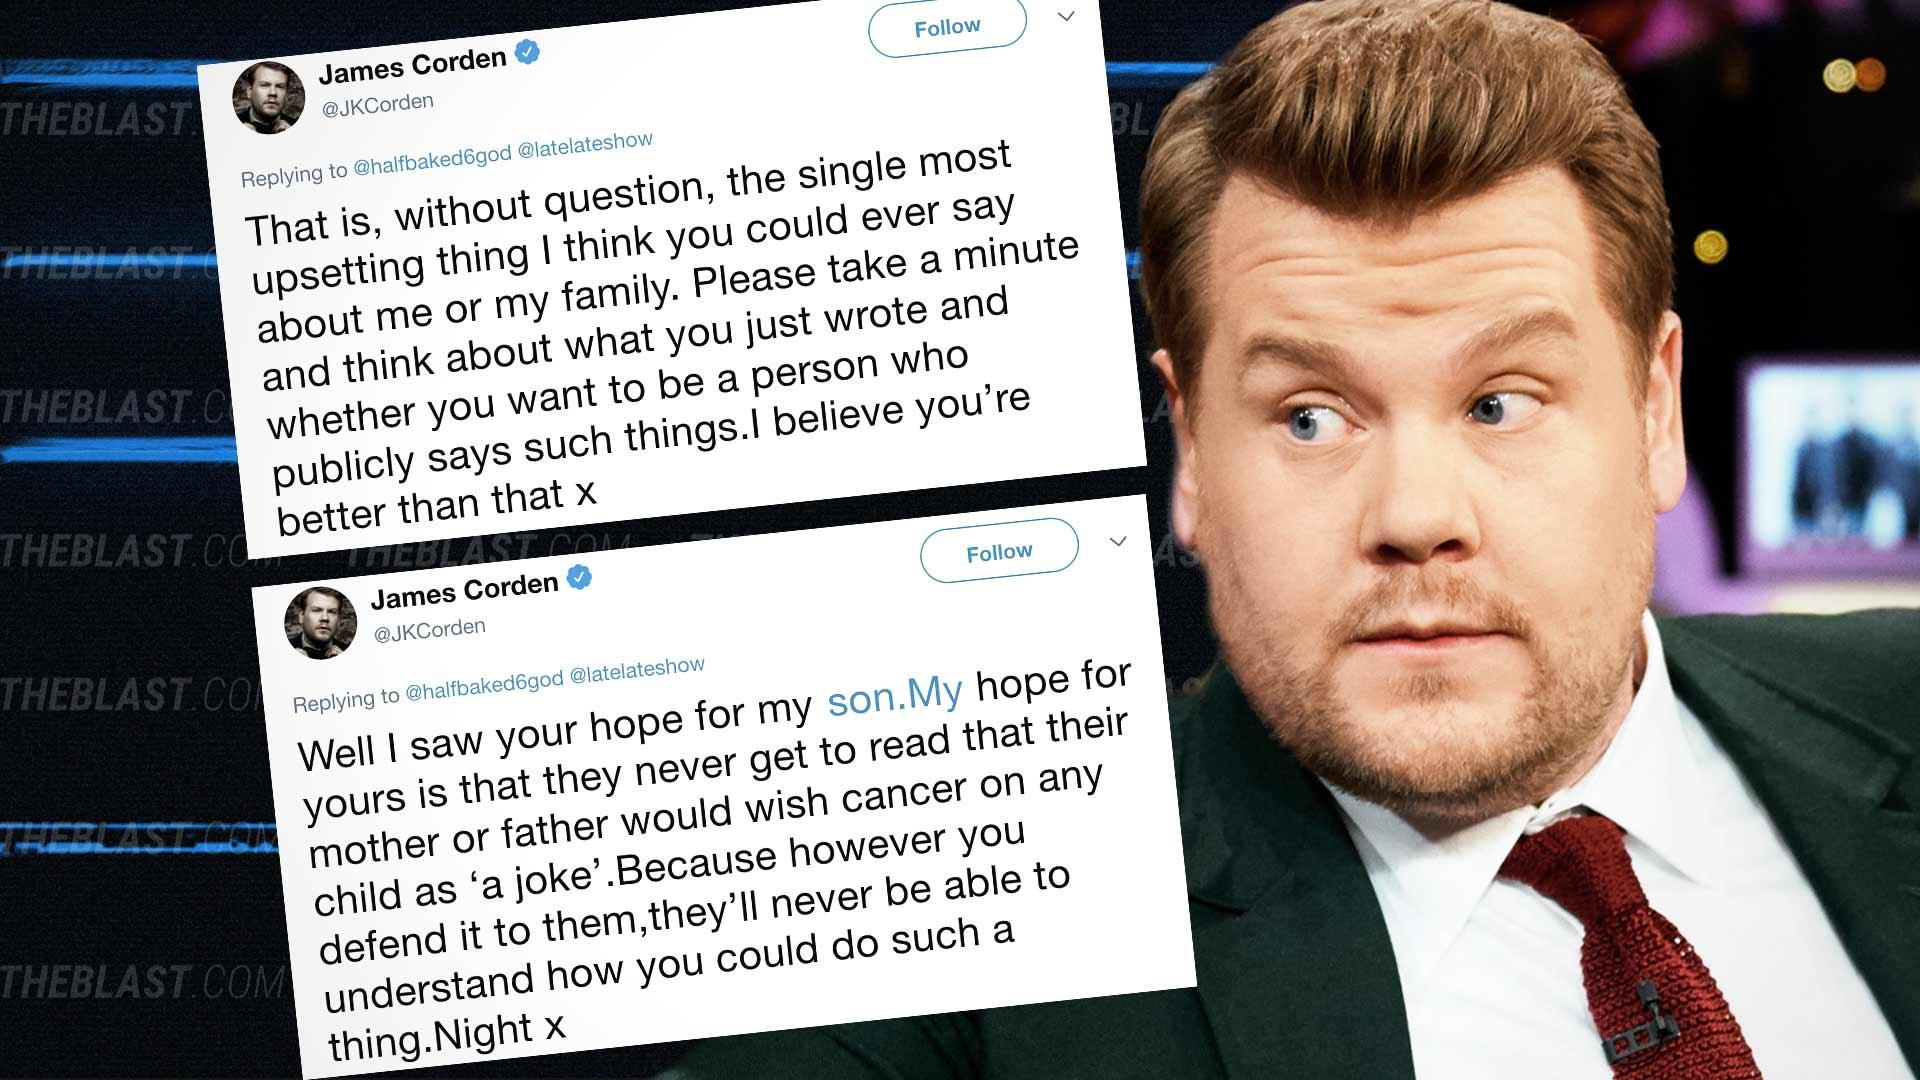 James Corden Slams Troll Who Wished Cancer on His Child